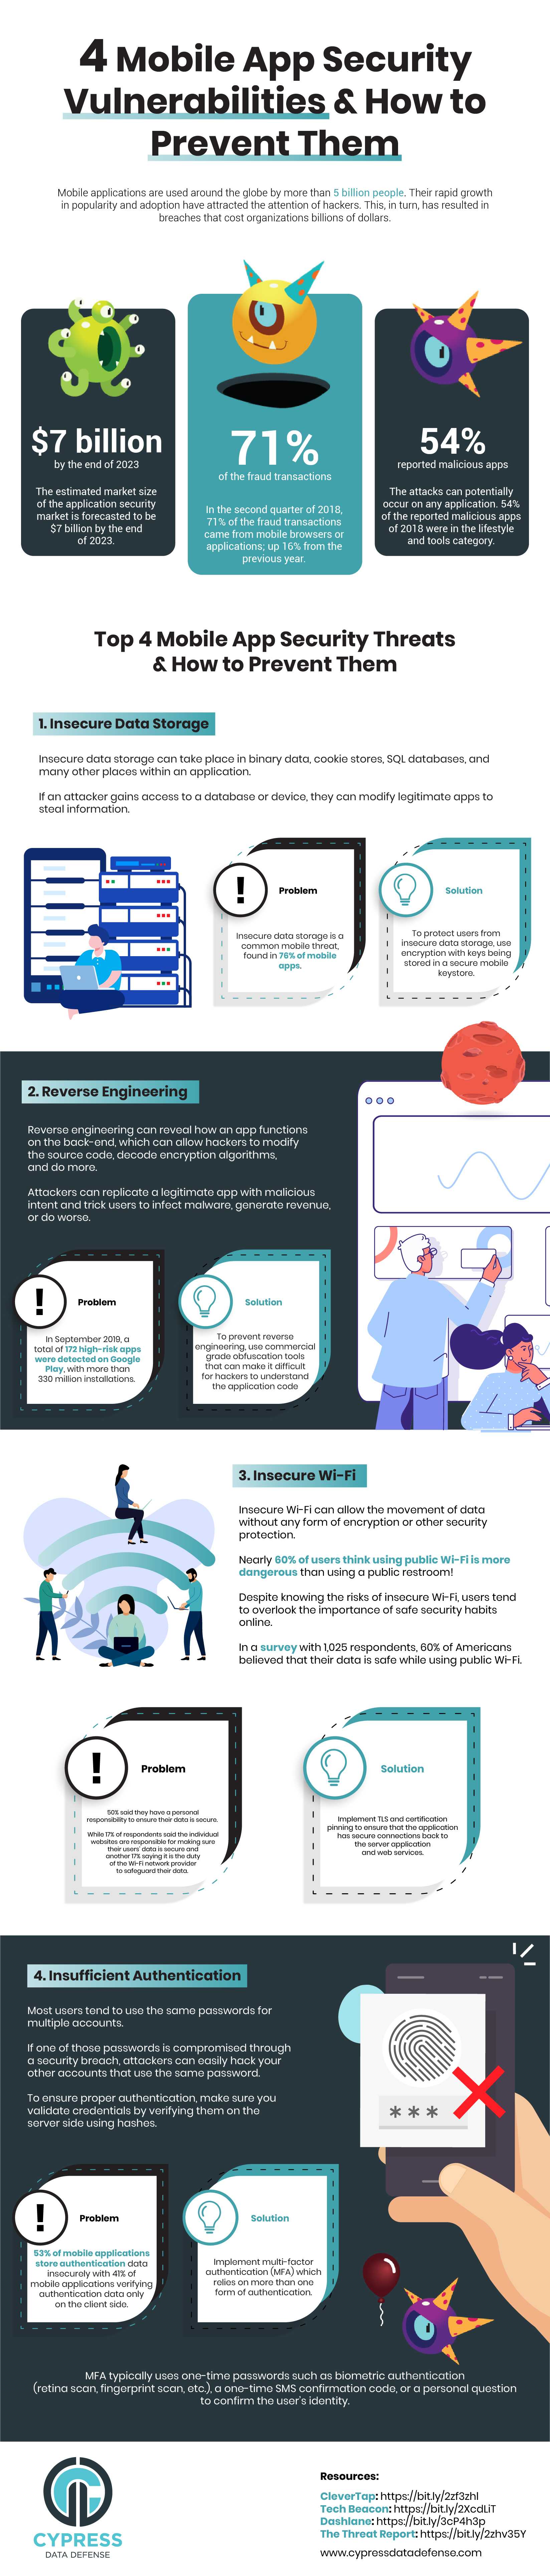 mobile app security vulnerabilities and how to mitigate them infographic